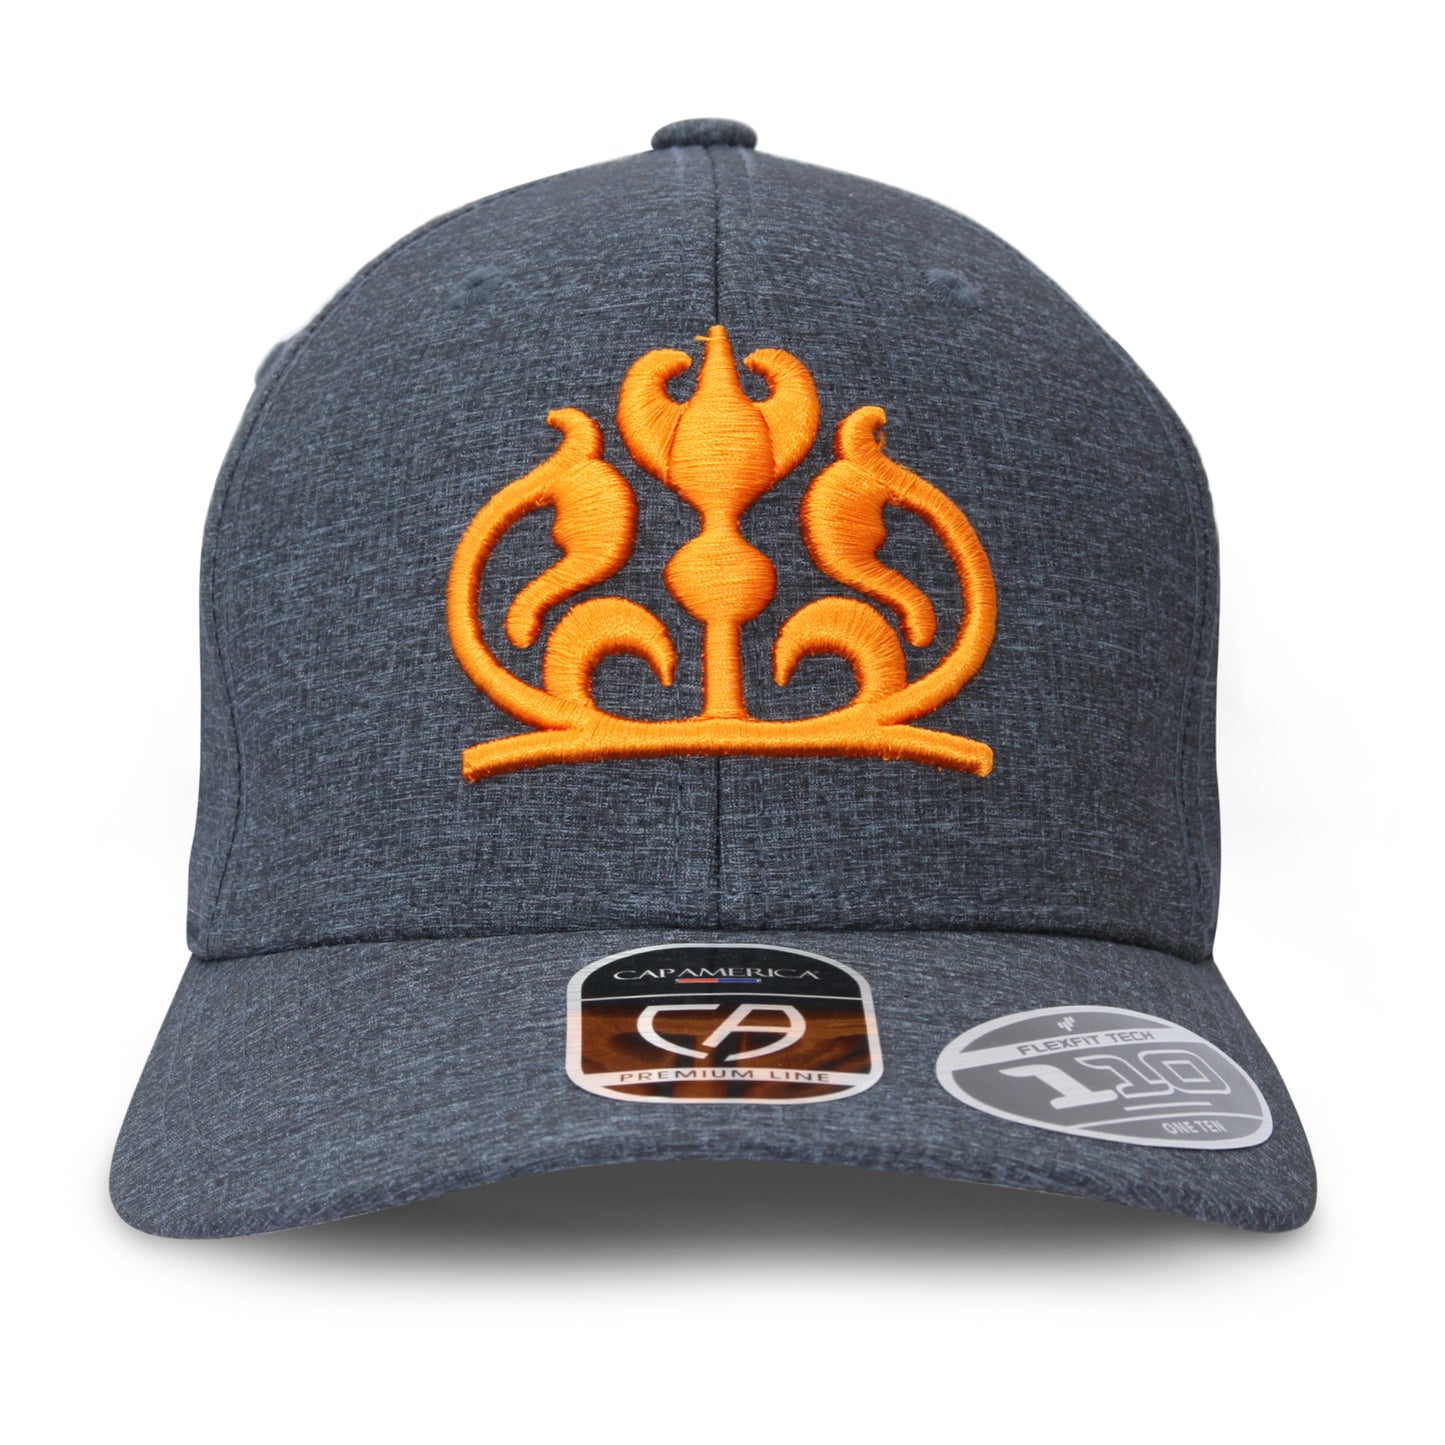 Icon Cap by Gamebore - Slate